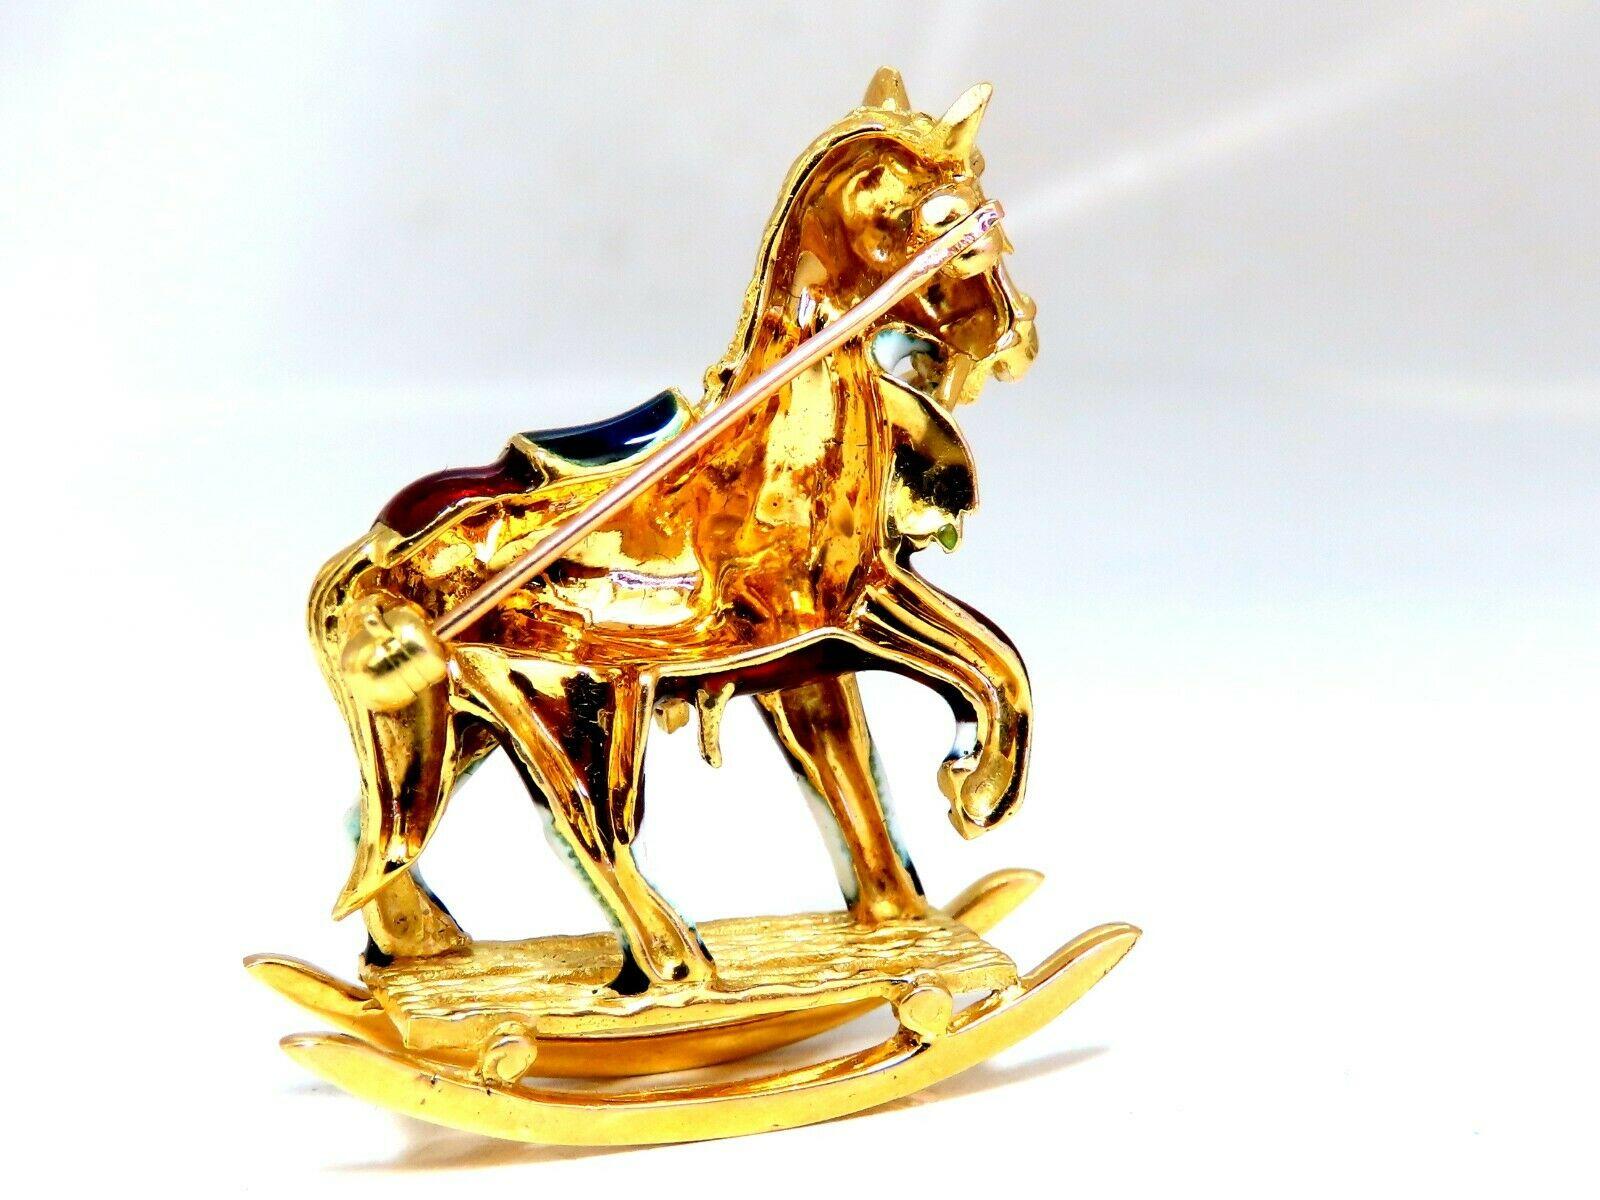 Intricate Enamel Rocking Horse Pin

.04ct. Natural Round diamond single cut within eye.

18kt yellow gold 

15.4 grams.

Overall: 1.2 x 1.1 inch

.38 inch wide.

Excellent made 

Gorgeous Details